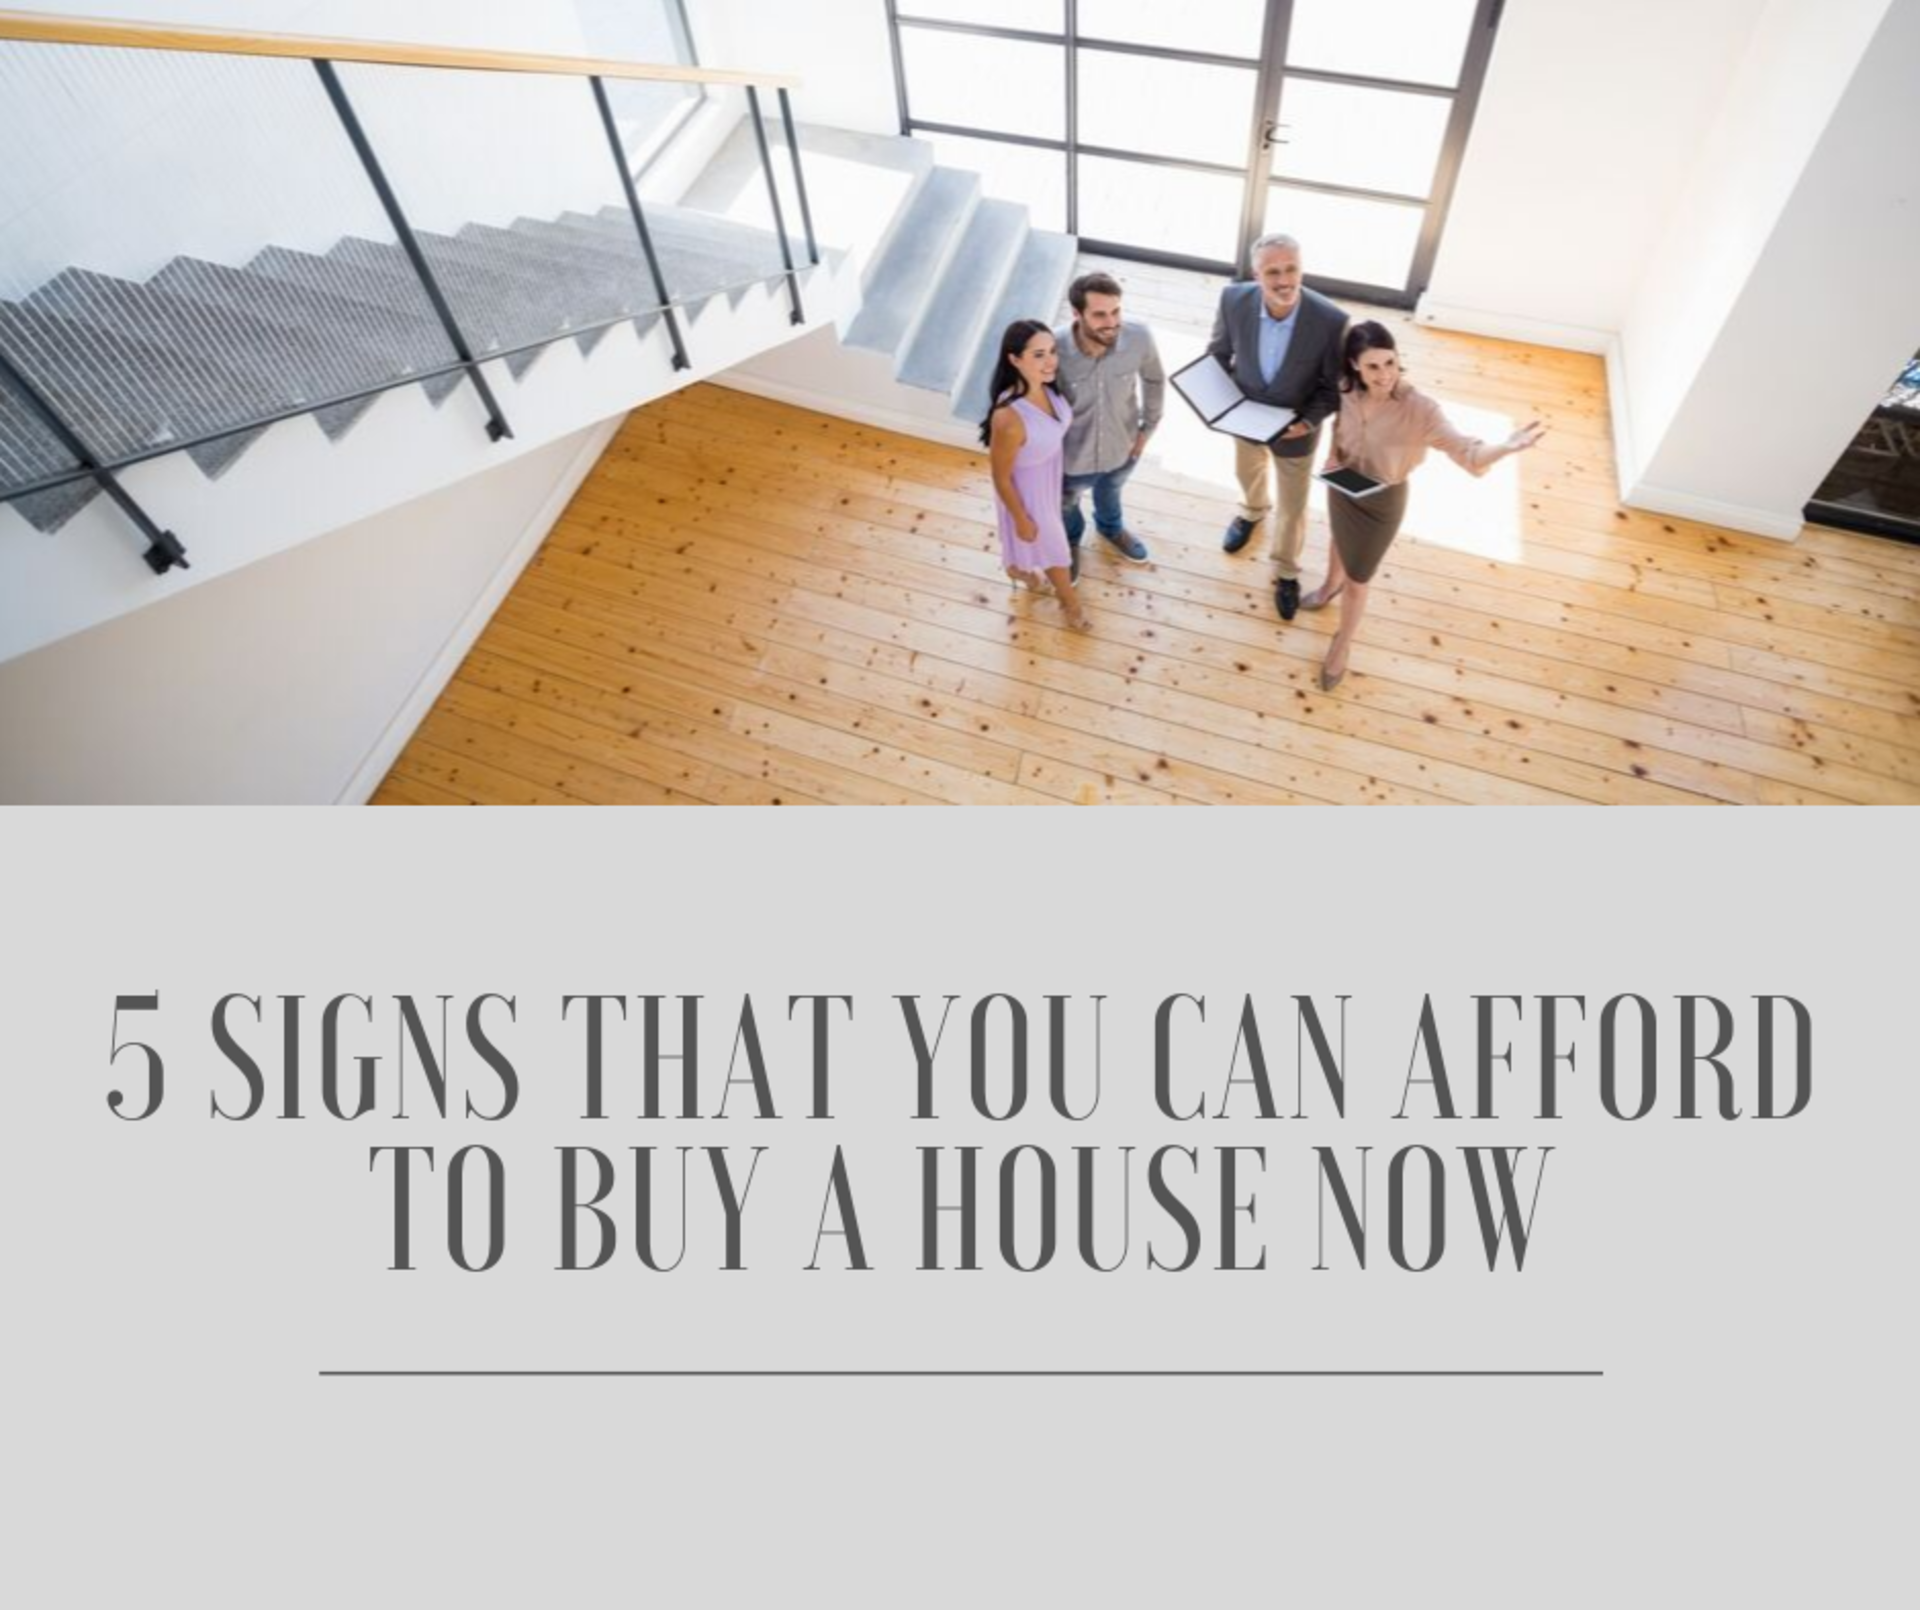 5 Signs That You Can Afford to Buy a House Now